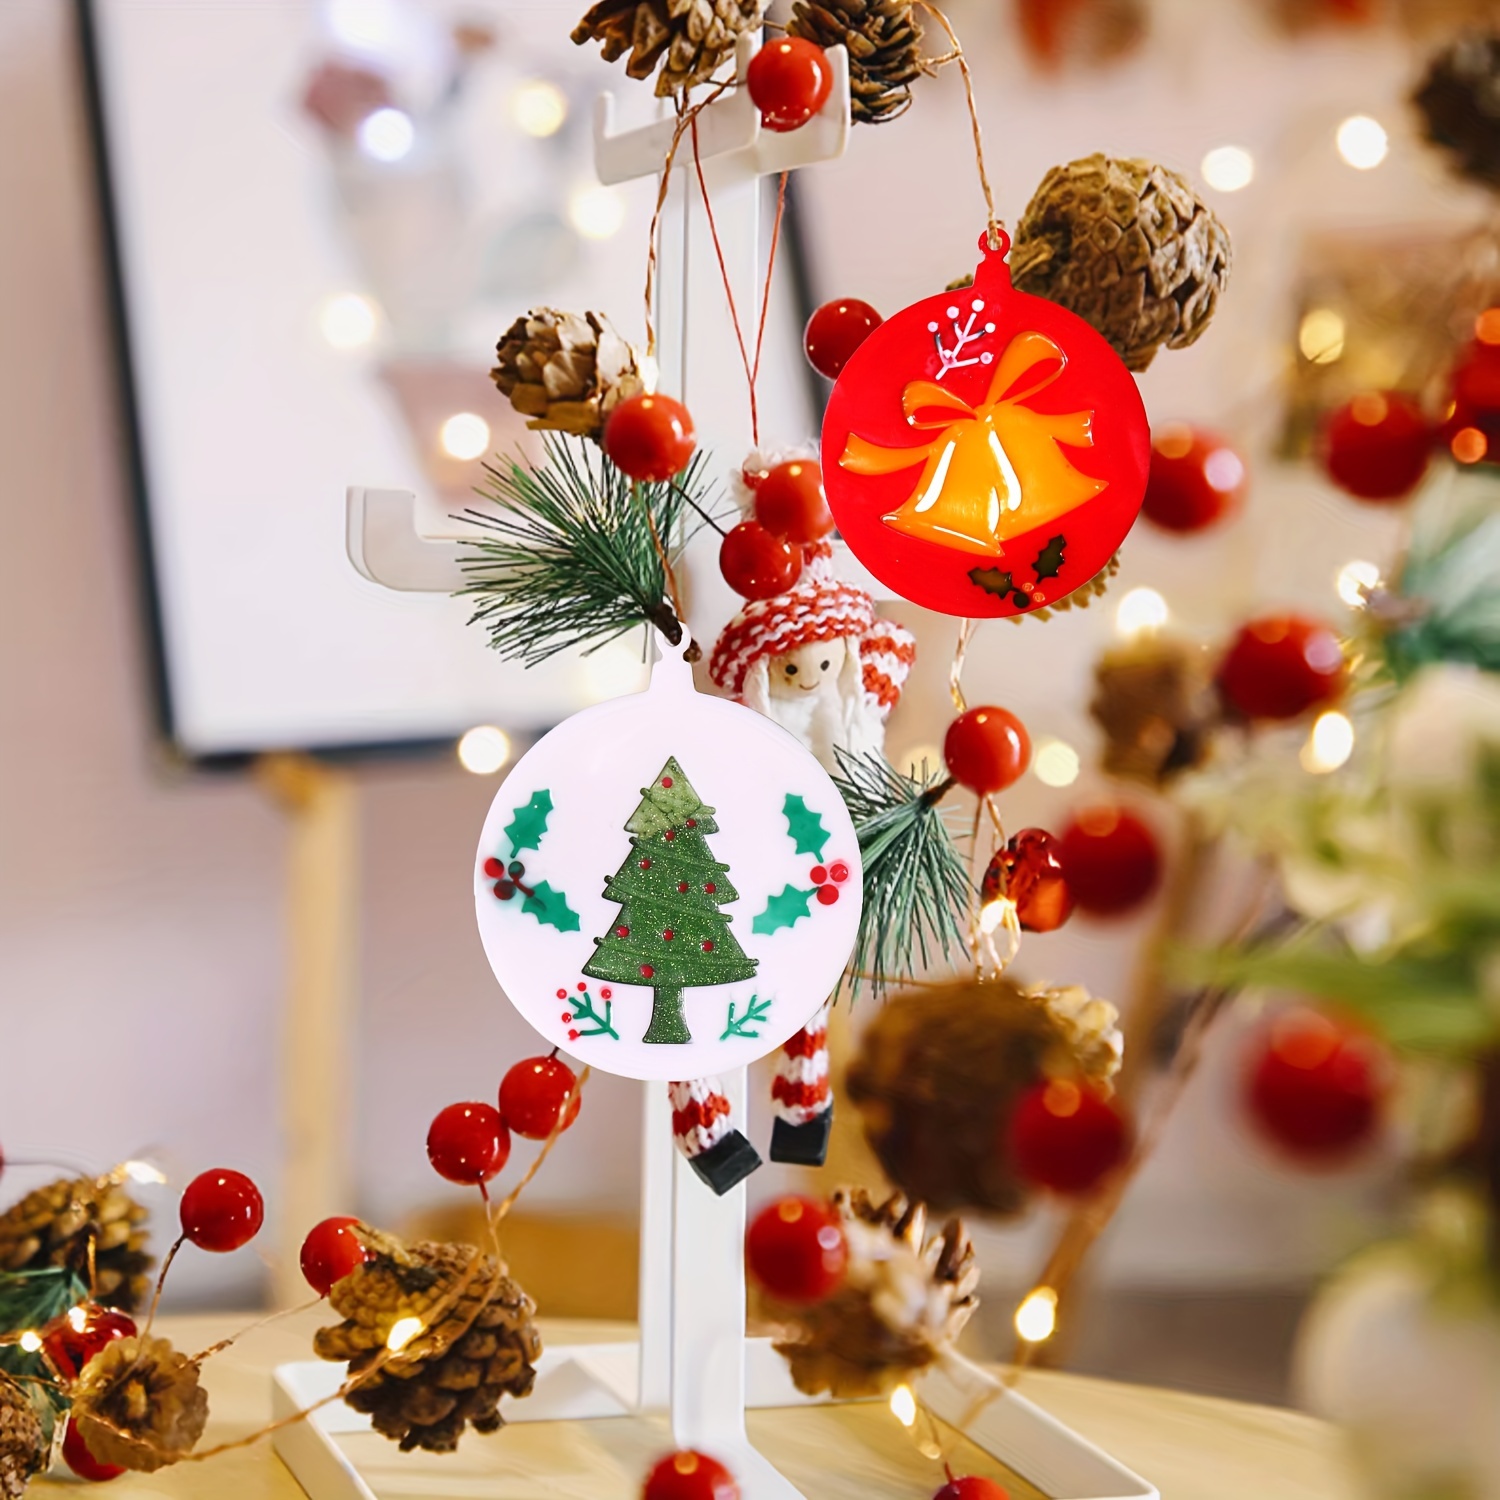 Miniature Christmas Tree with Ornaments